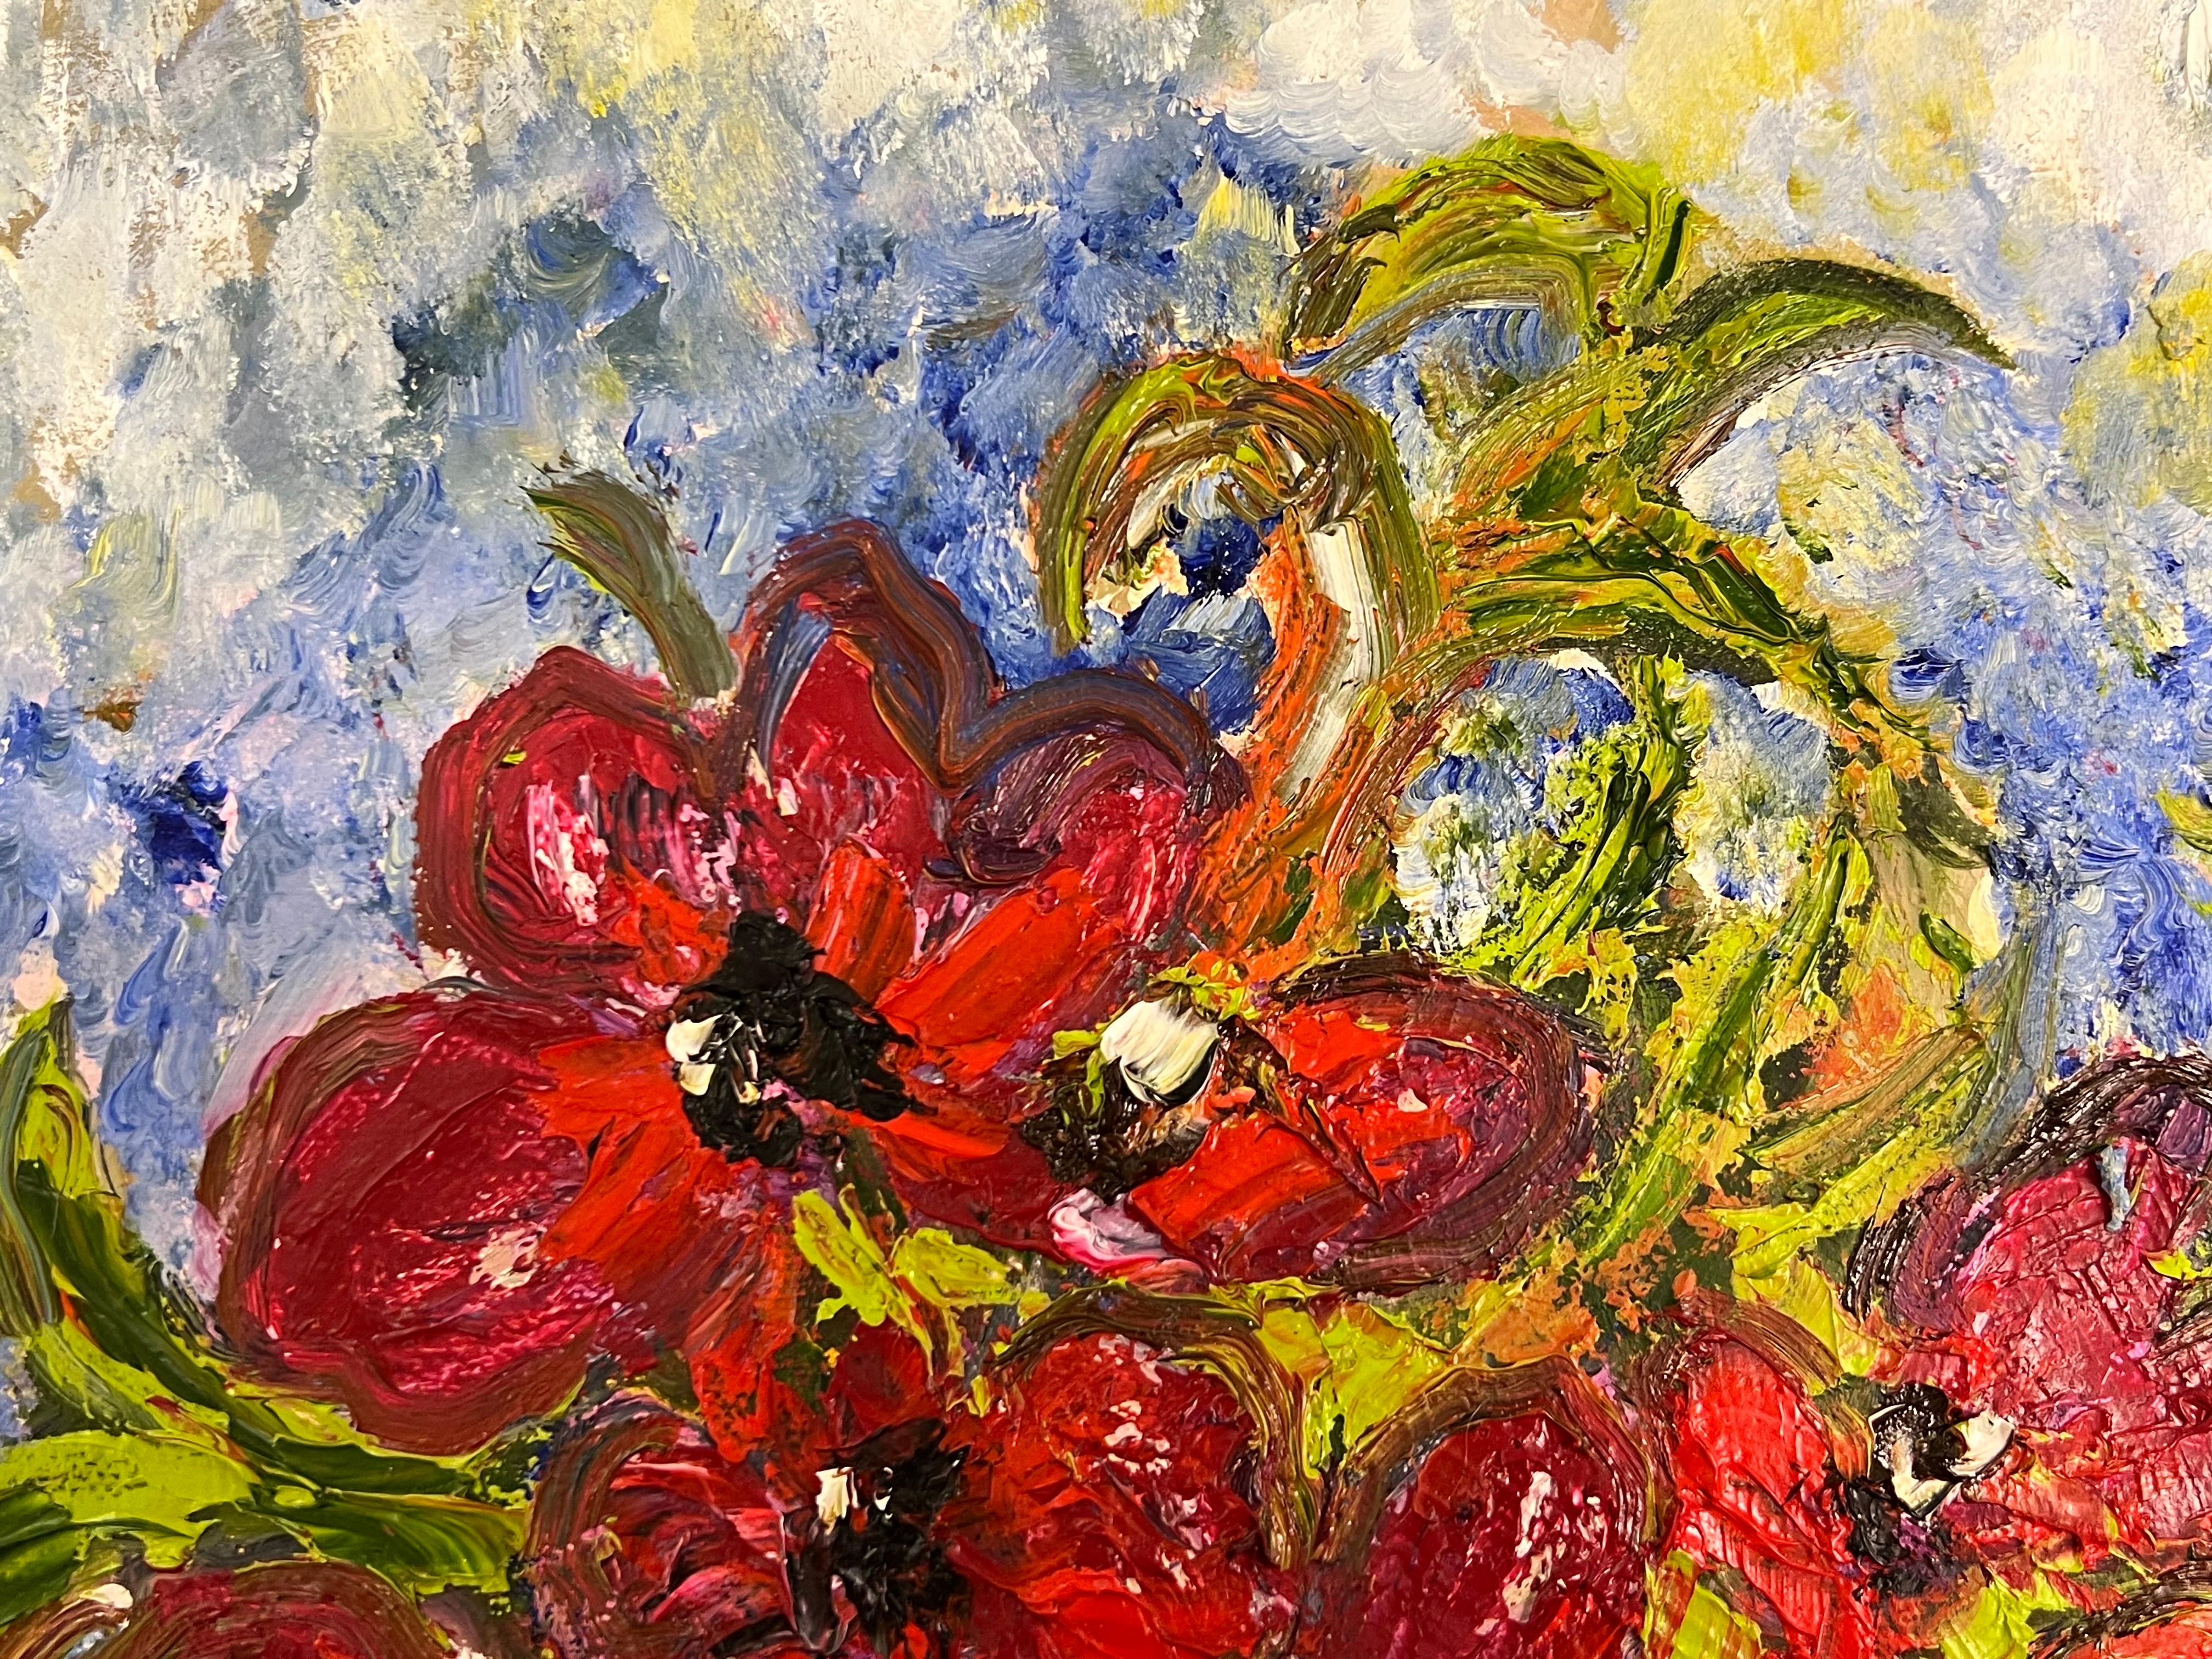 Expressive Still Life Painting Red Rose Flowers 'Red for Love' by British Artist For Sale 7